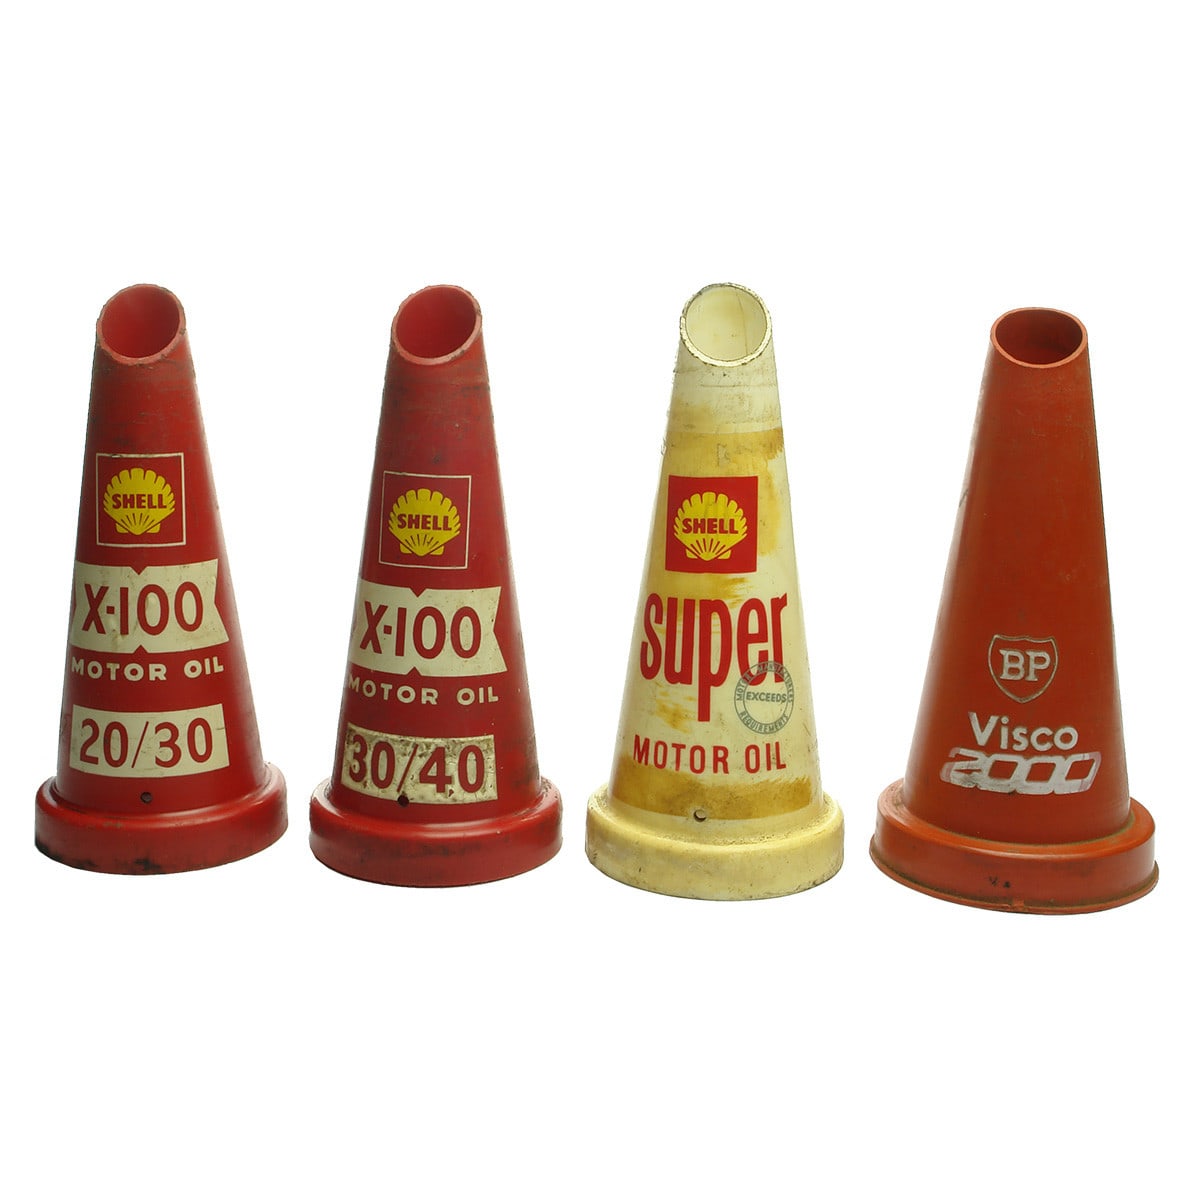 Four Plastic Oil Bottle Pourers: Three different Shell Motor Oil and one BP Visco.